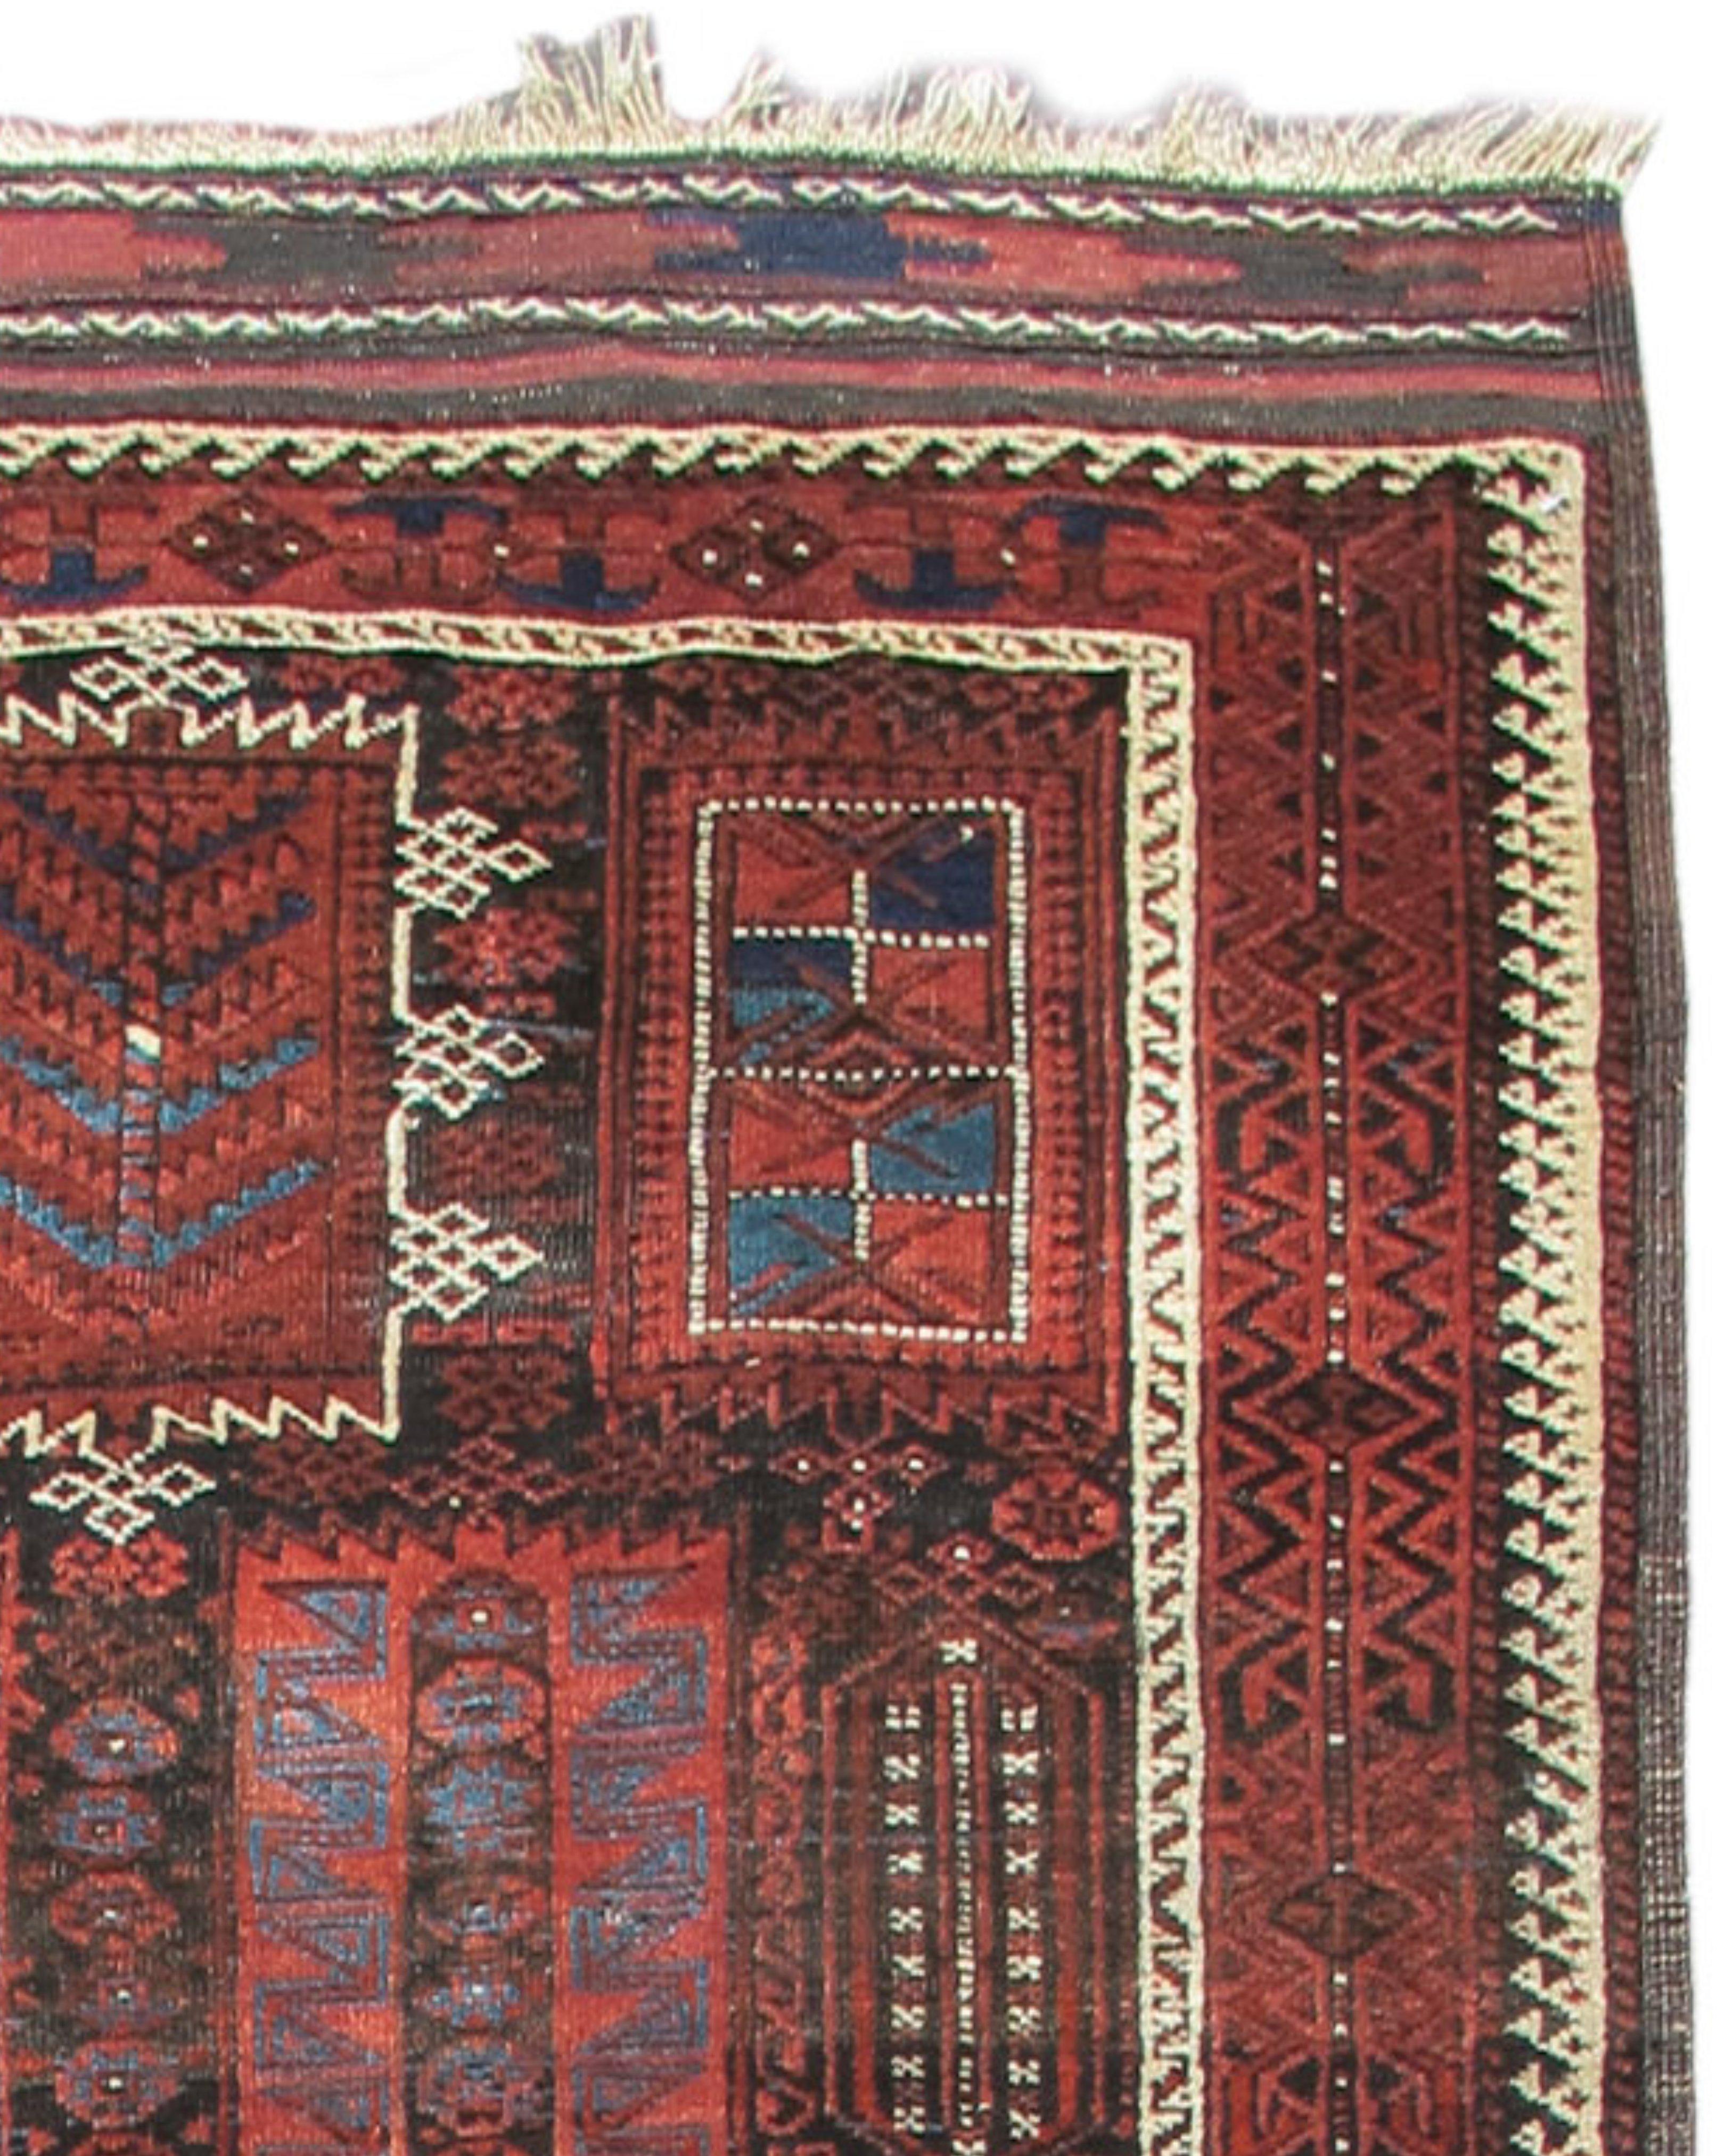 Antique Baluch Rug, c. 1900

Additional Information:
Dimensions: 3'6